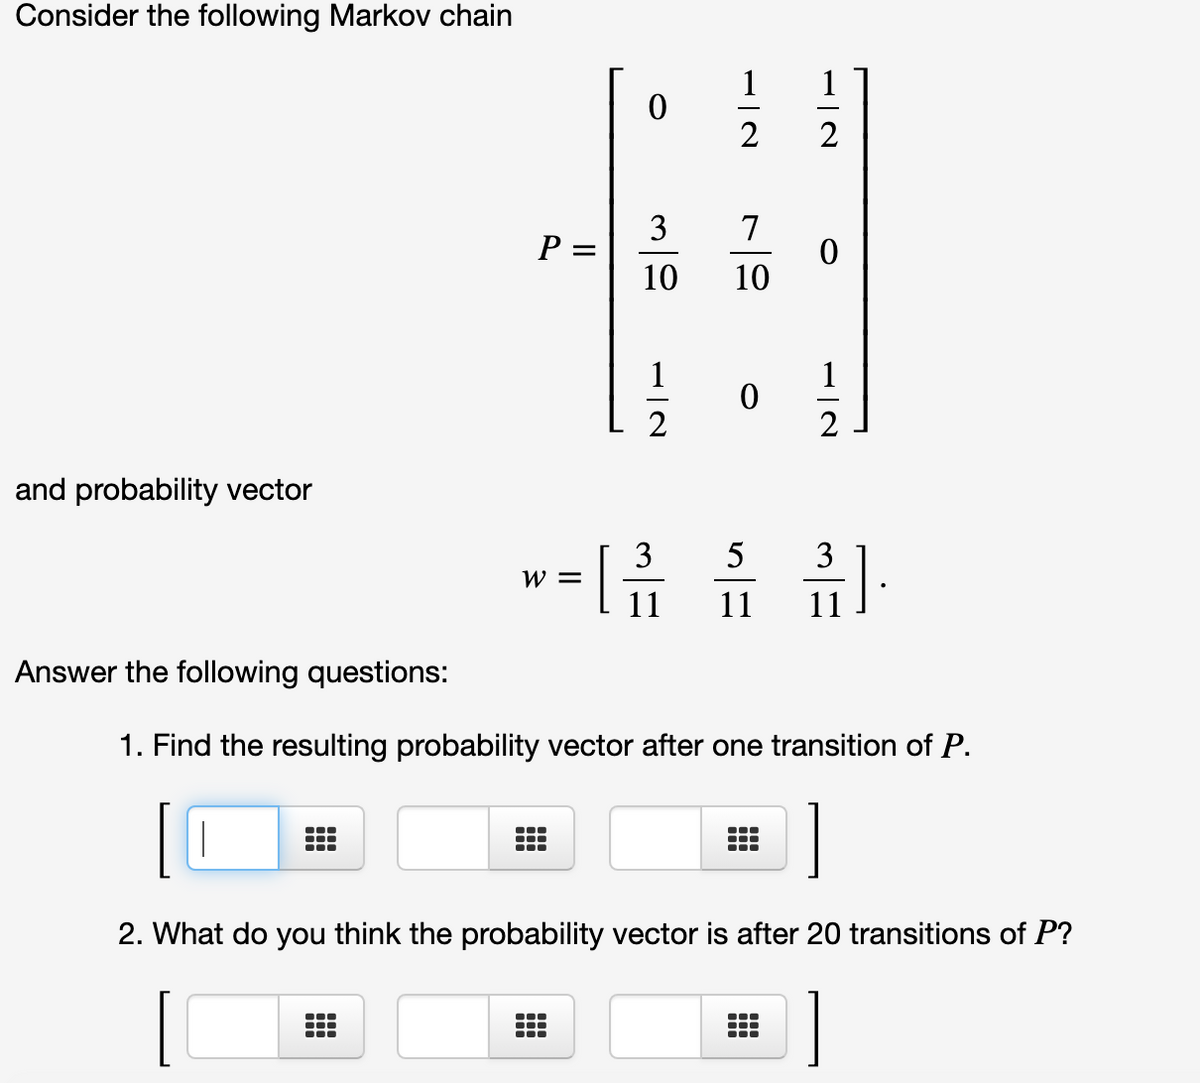 Consider the following Markov chain
1
1
2
2
3
P =
10
7
10
1
1
2
and probability vector
3
W =
[
5
3
11
11
11
Answer the following questions:
1. Find the resulting probability vector after one transition of P.
...
2. What do you think the probability vector is after 20 transitions of P?
...
